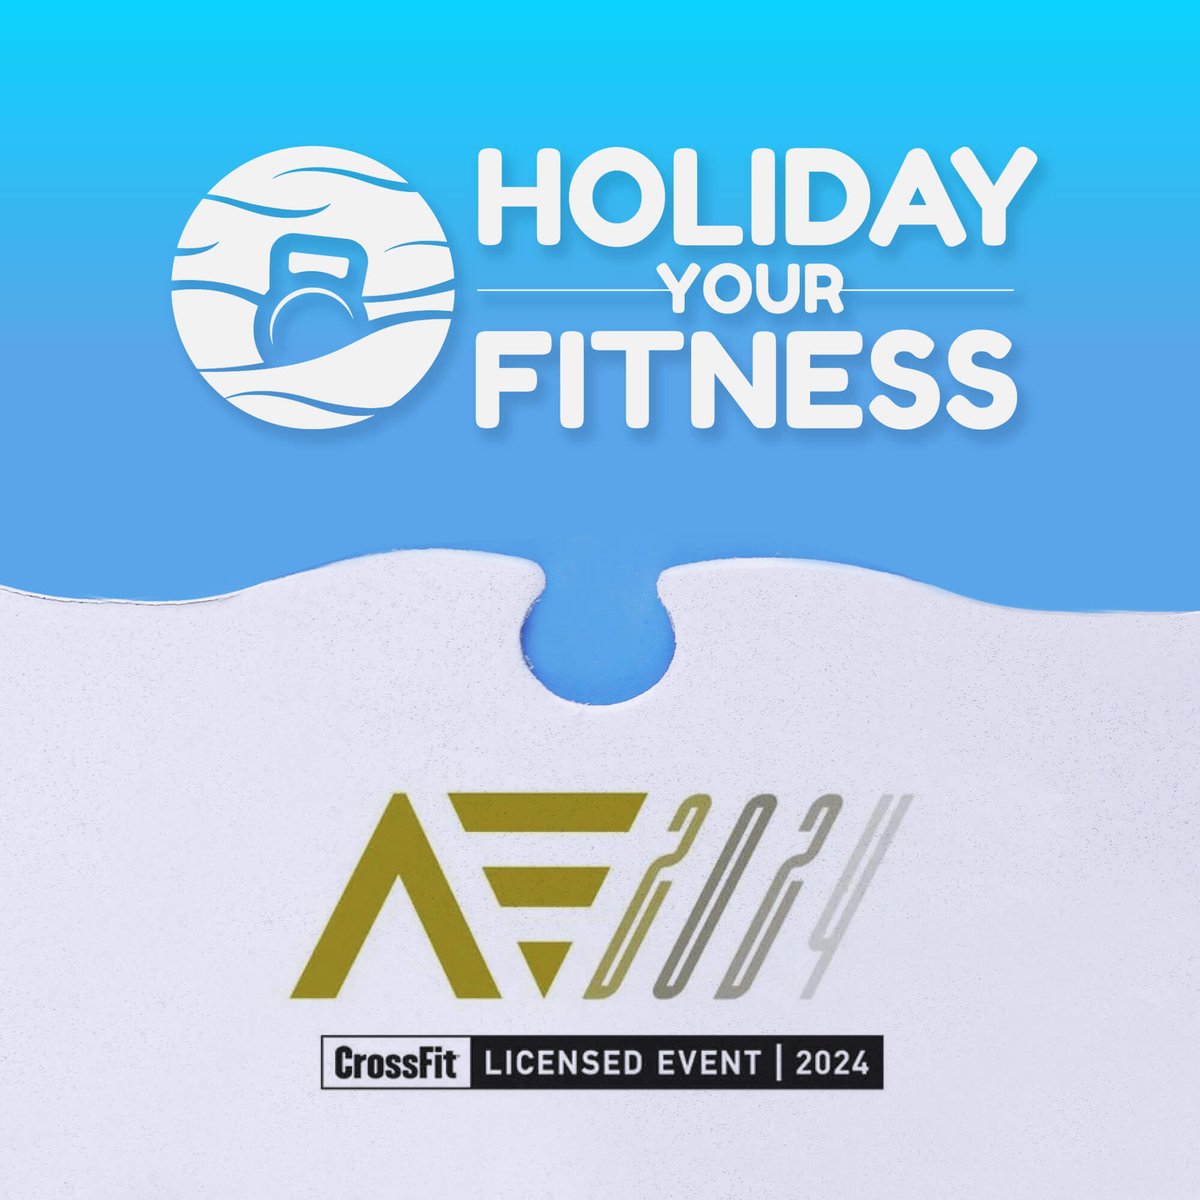 The logos of Athens Throwdown and Holiday your Fitness together.